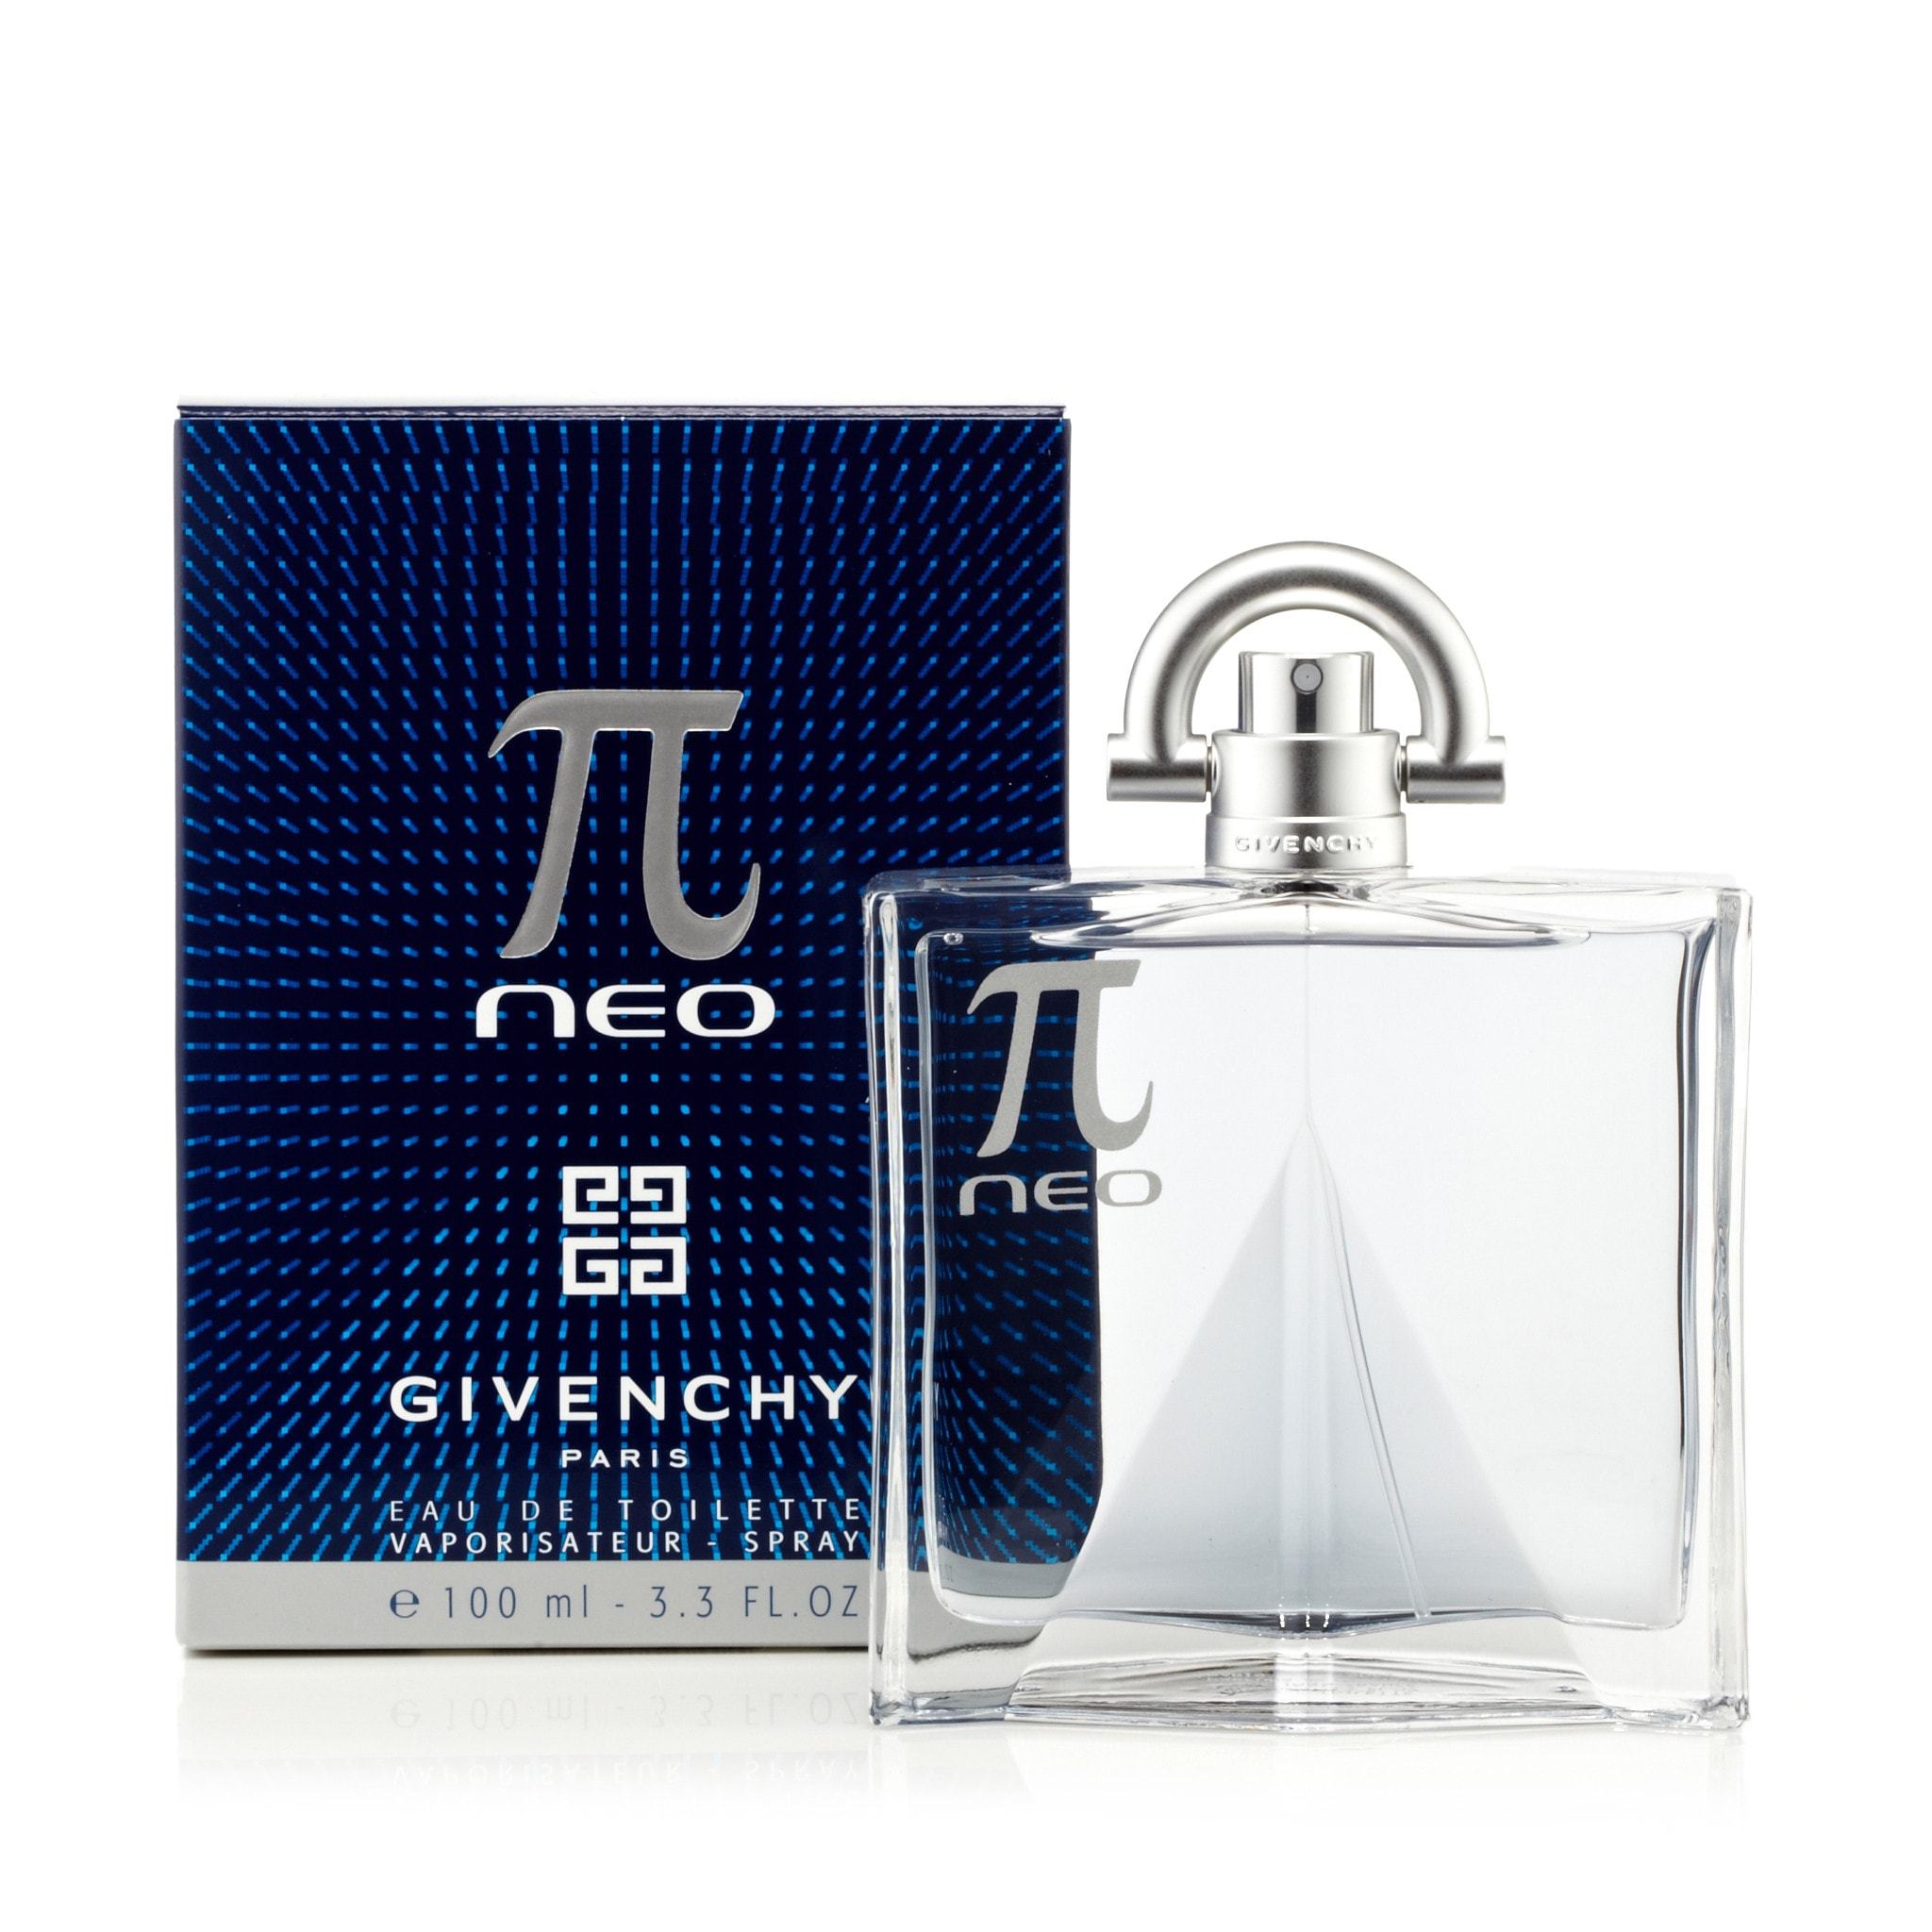 PI Neo EDT for Men by Givenchy – Fragrance Outlet